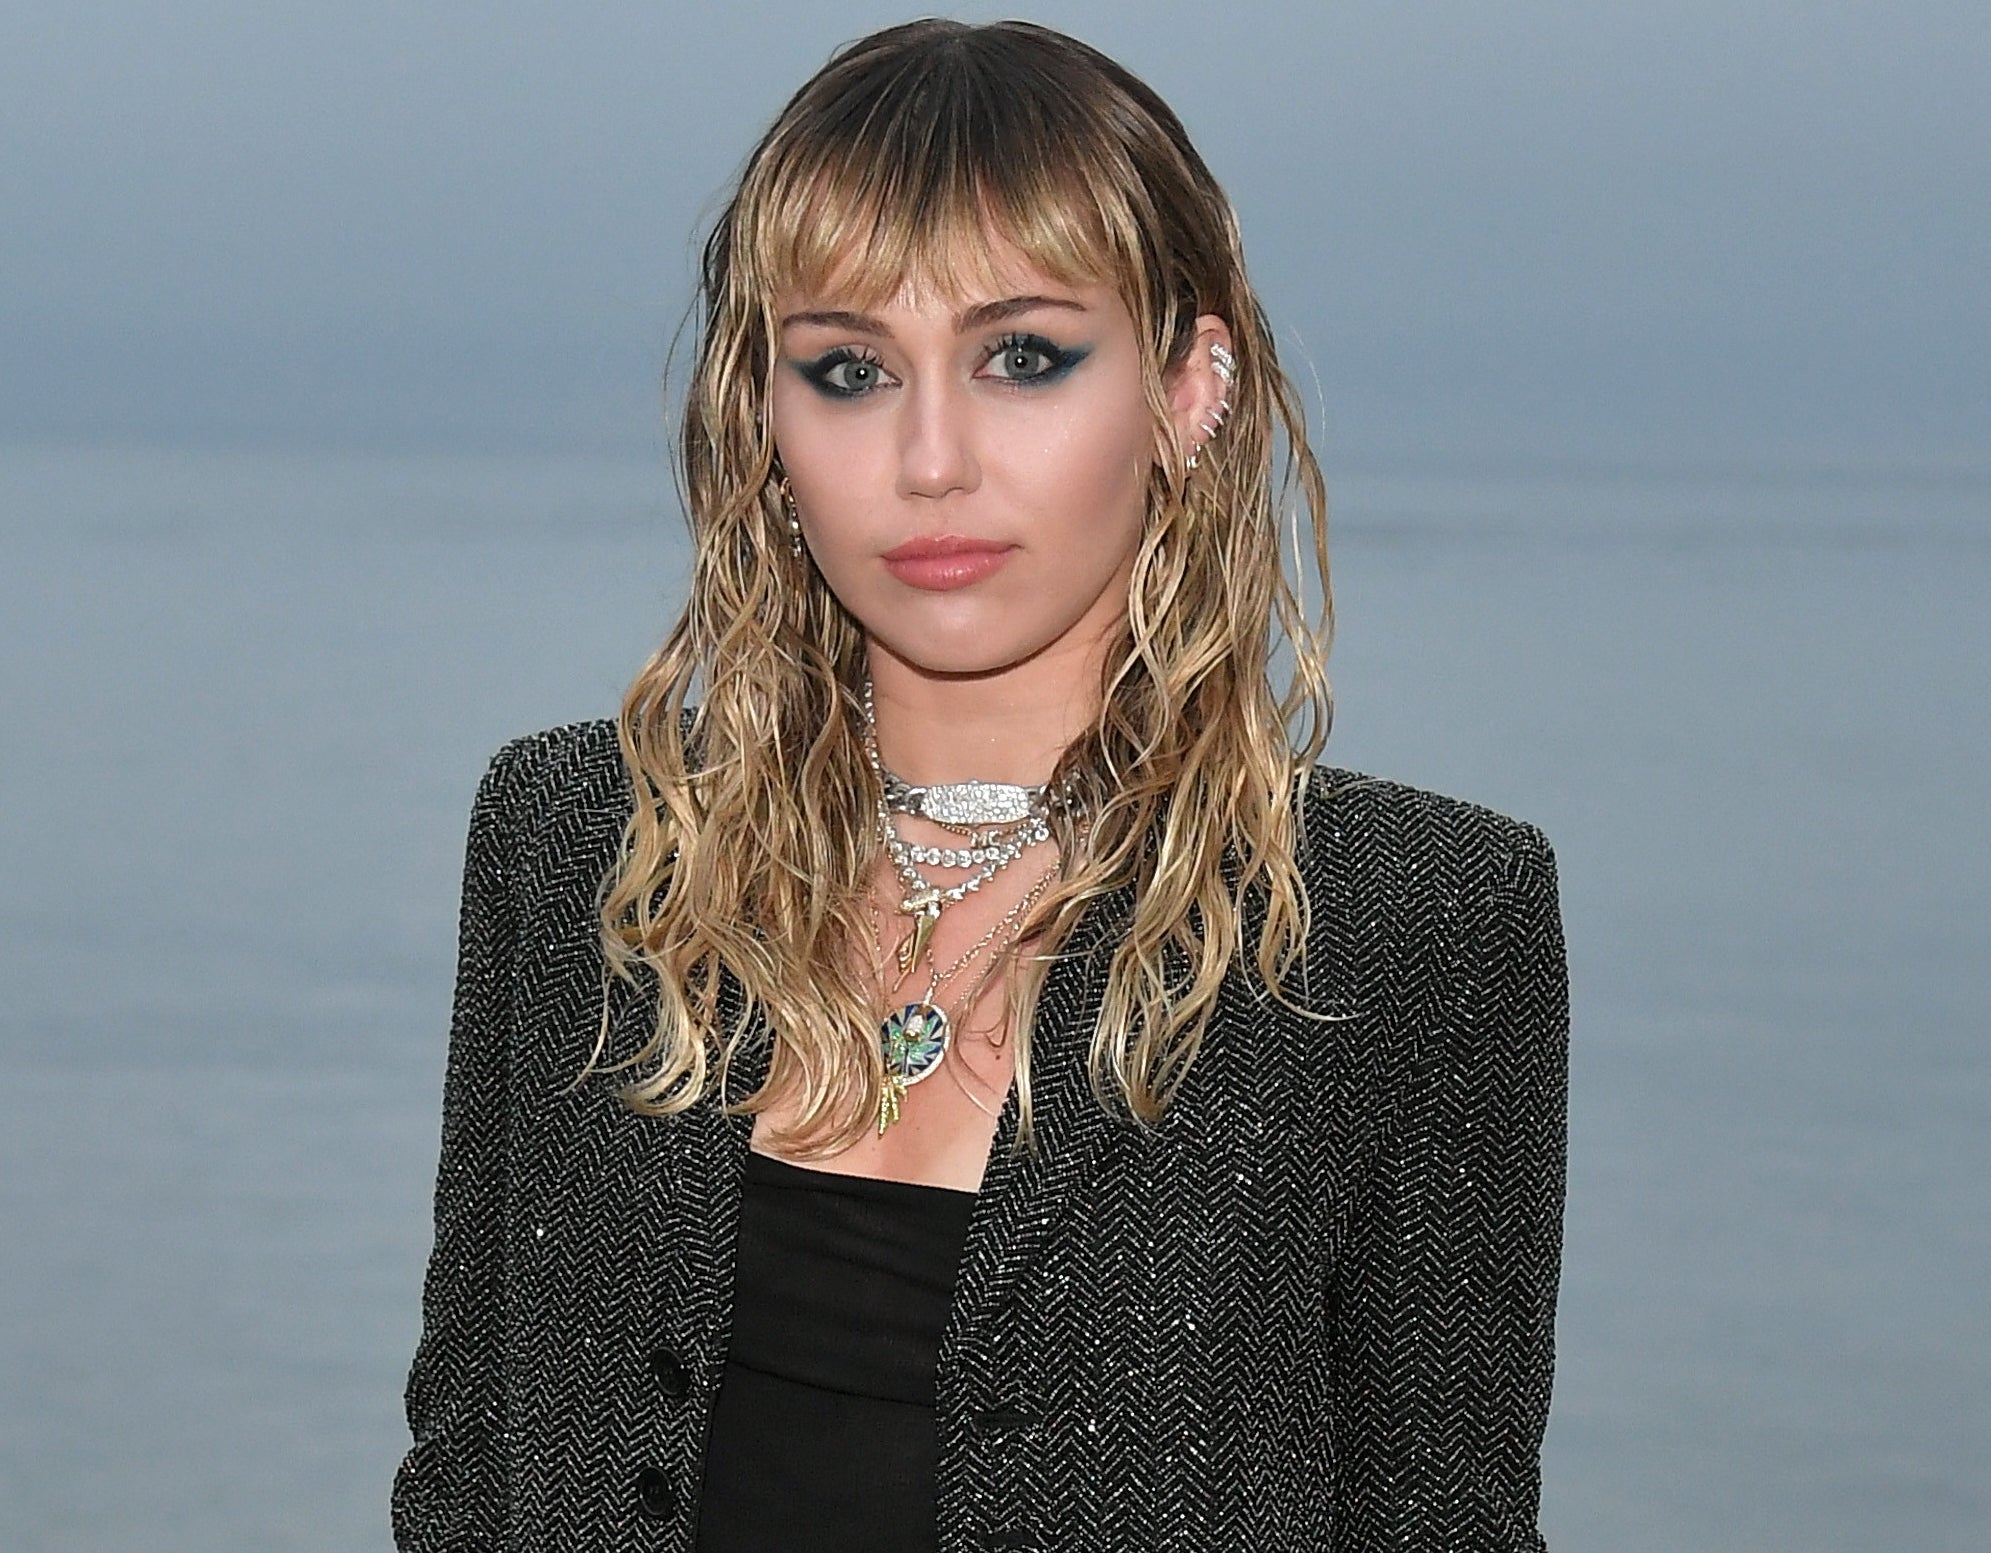 Miley wears a black blazer jacket and tank top with silver necklaces